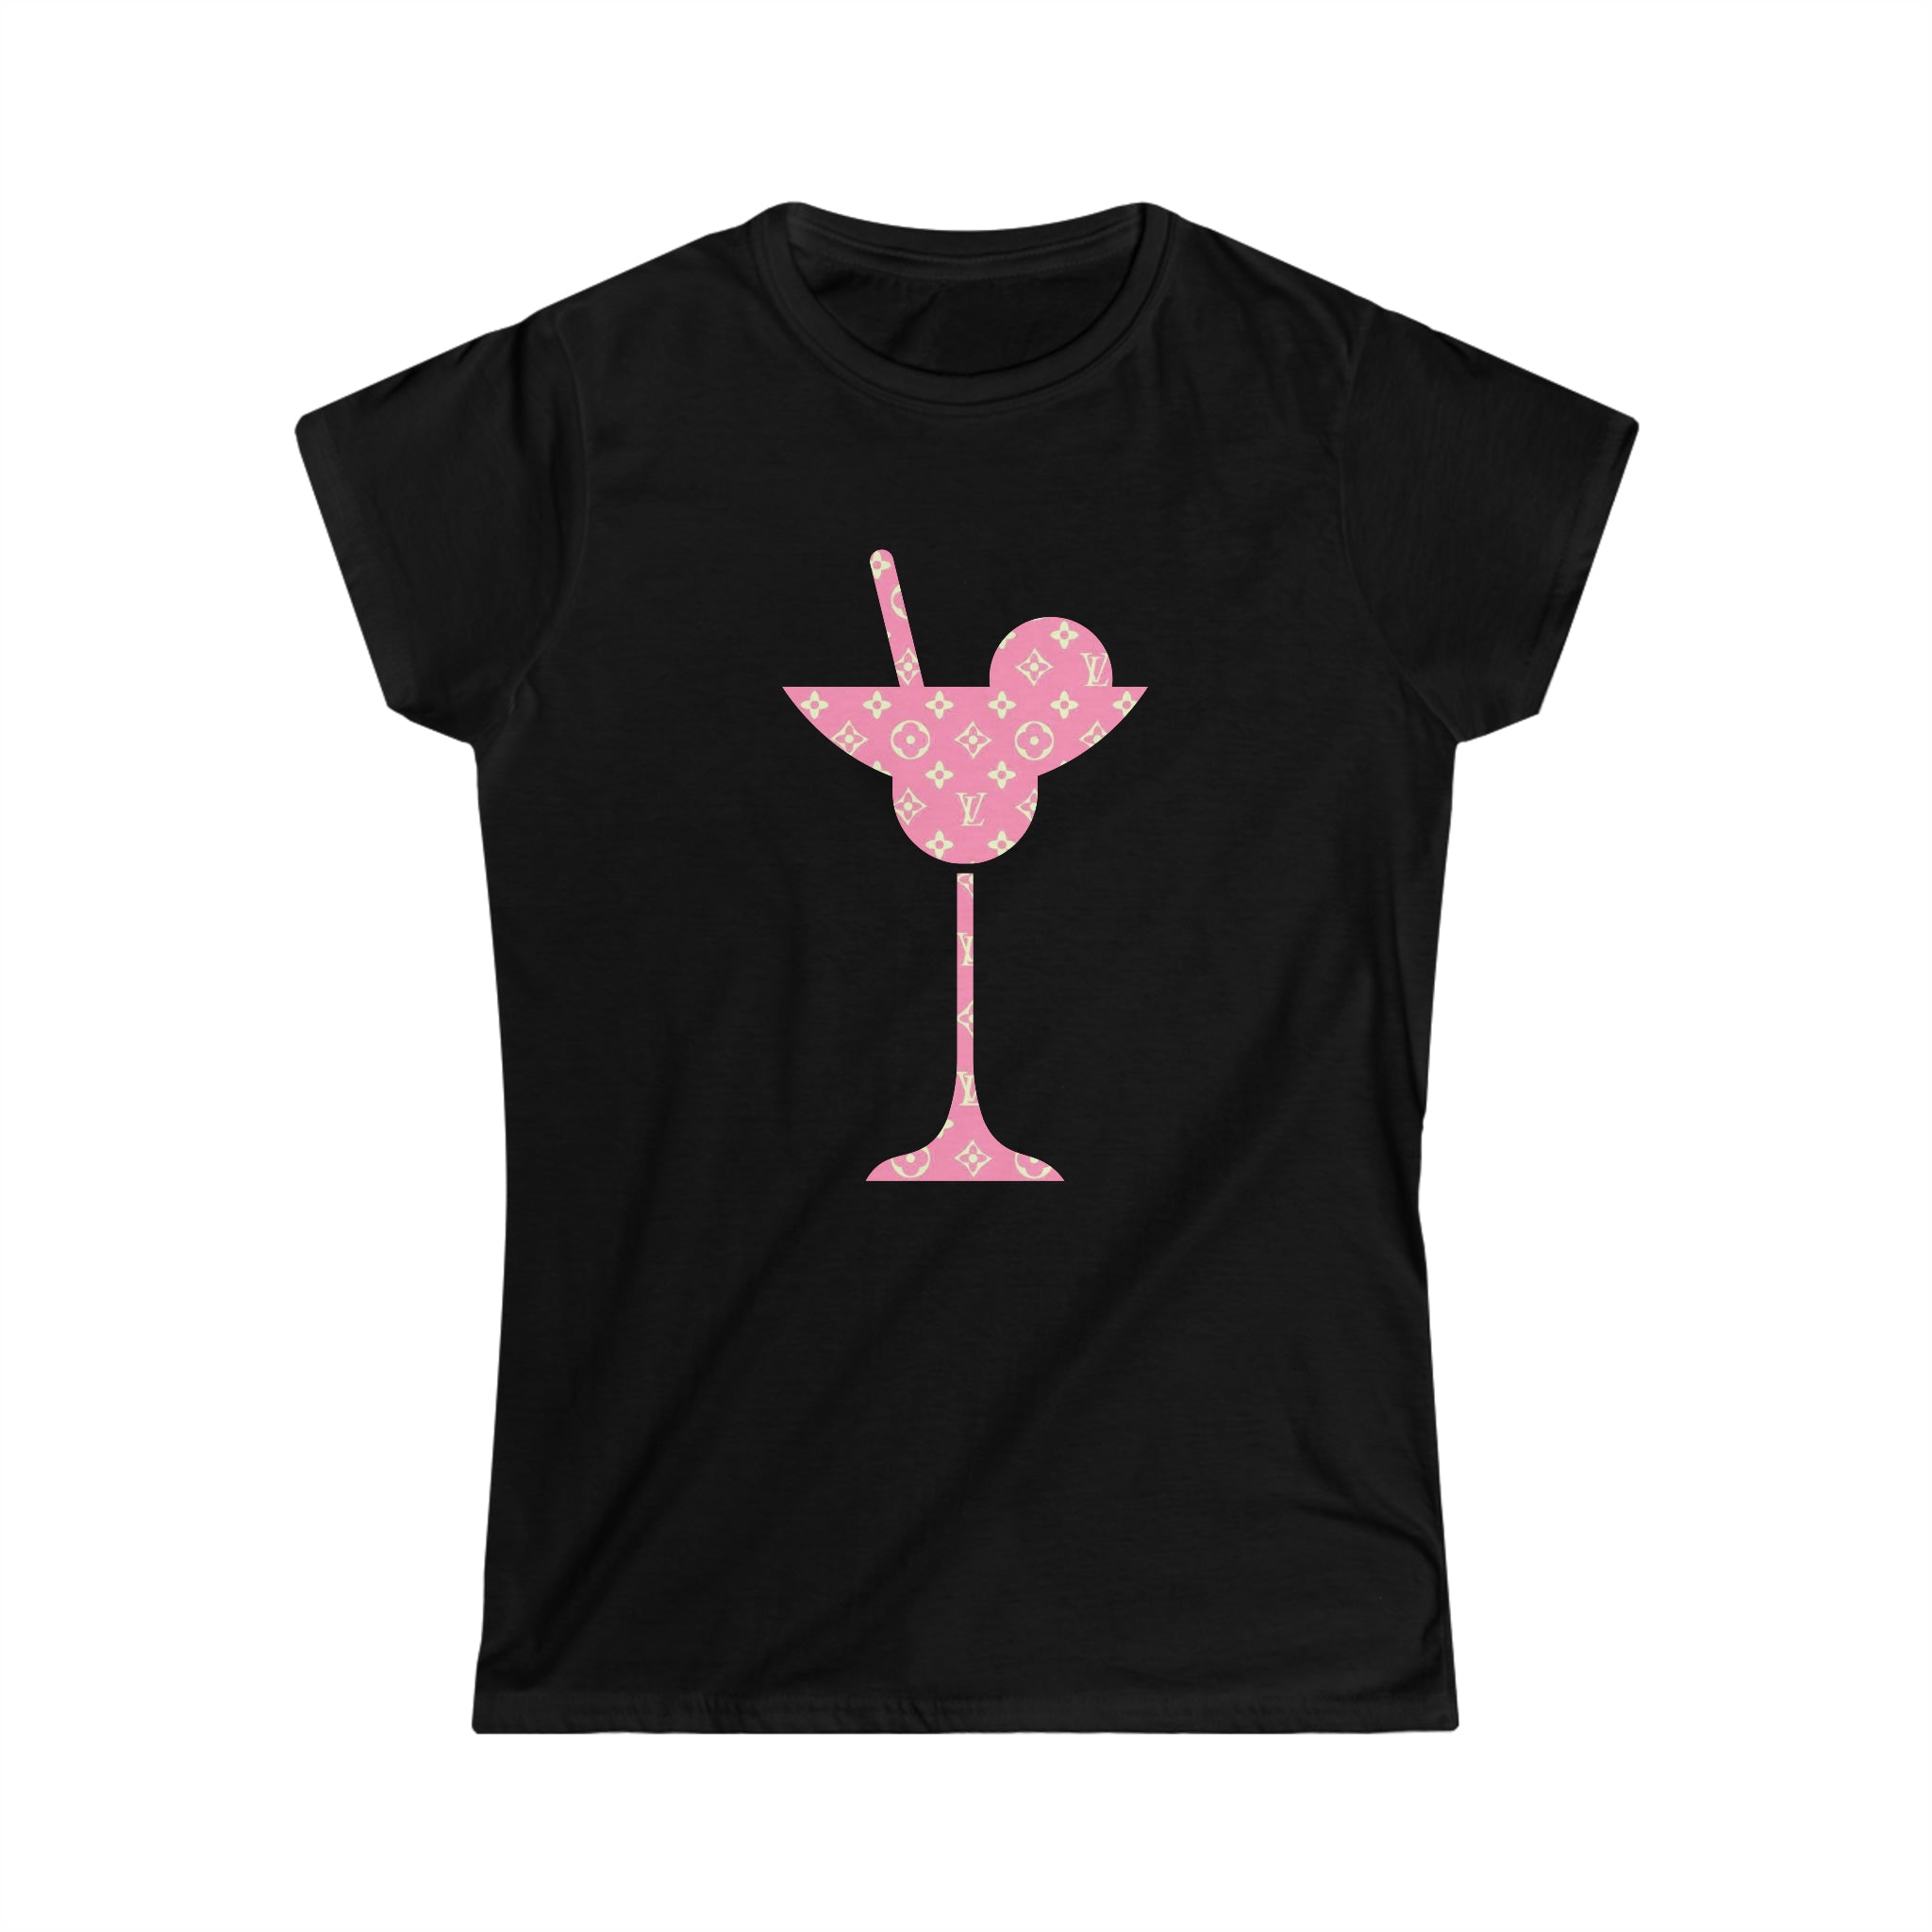  Abby Pattern in Pink Icons Martini Glass Women's Softstyle Tee T-ShirtBlack2XL